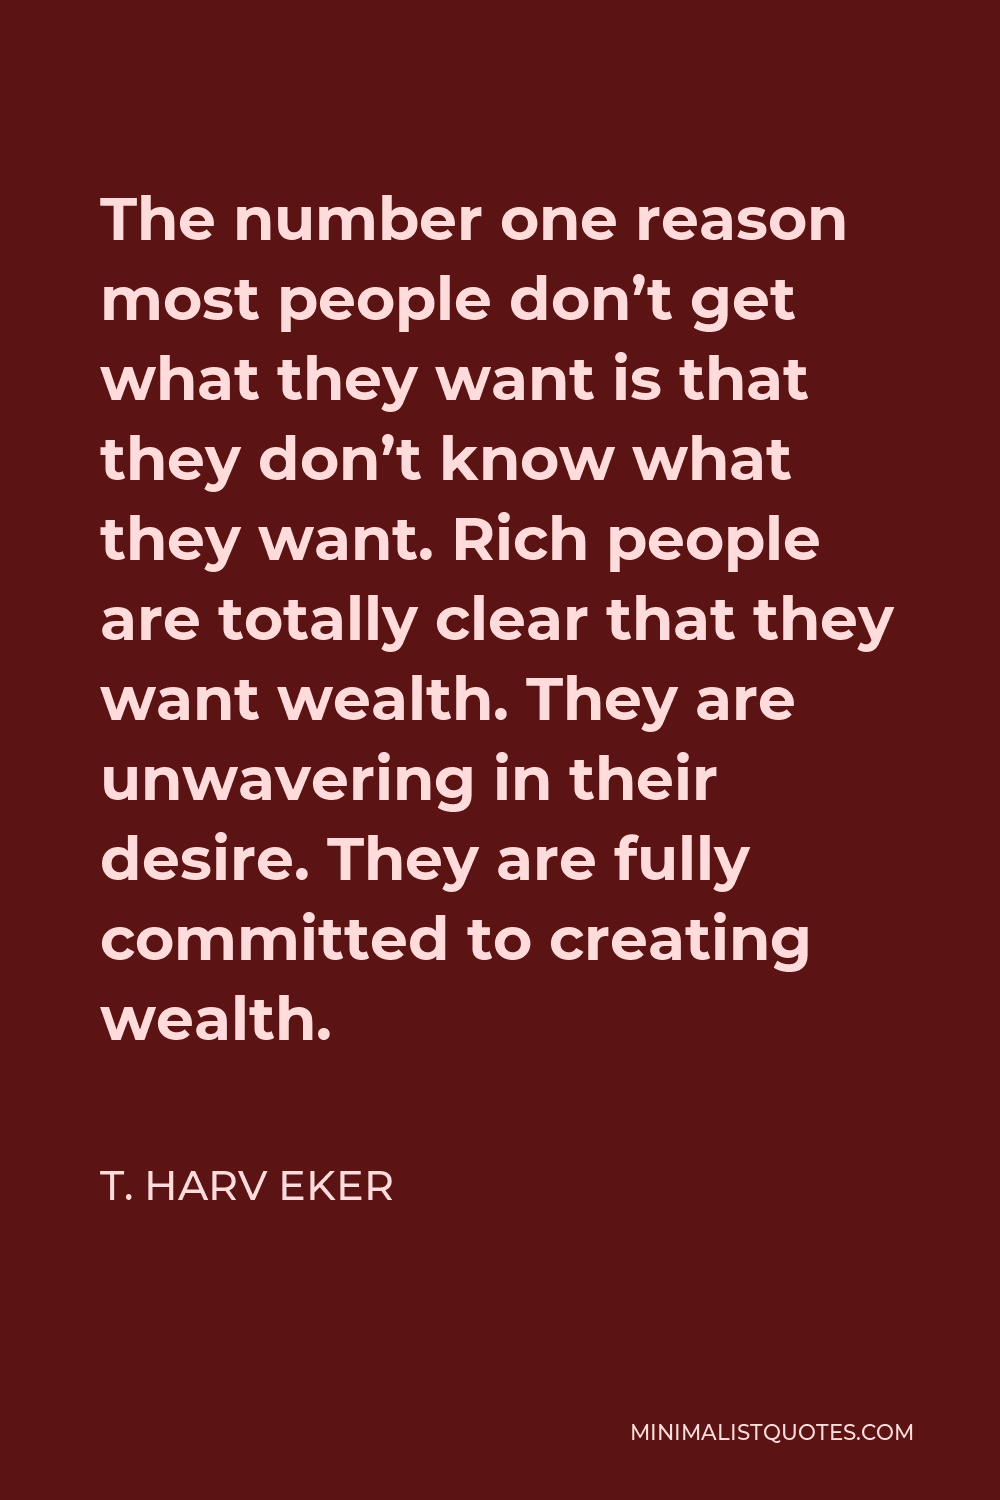 T. Harv Eker Quote - The number one reason most people don’t get what they want is that they don’t know what they want. Rich people are totally clear that they want wealth. They are unwavering in their desire. They are fully committed to creating wealth.